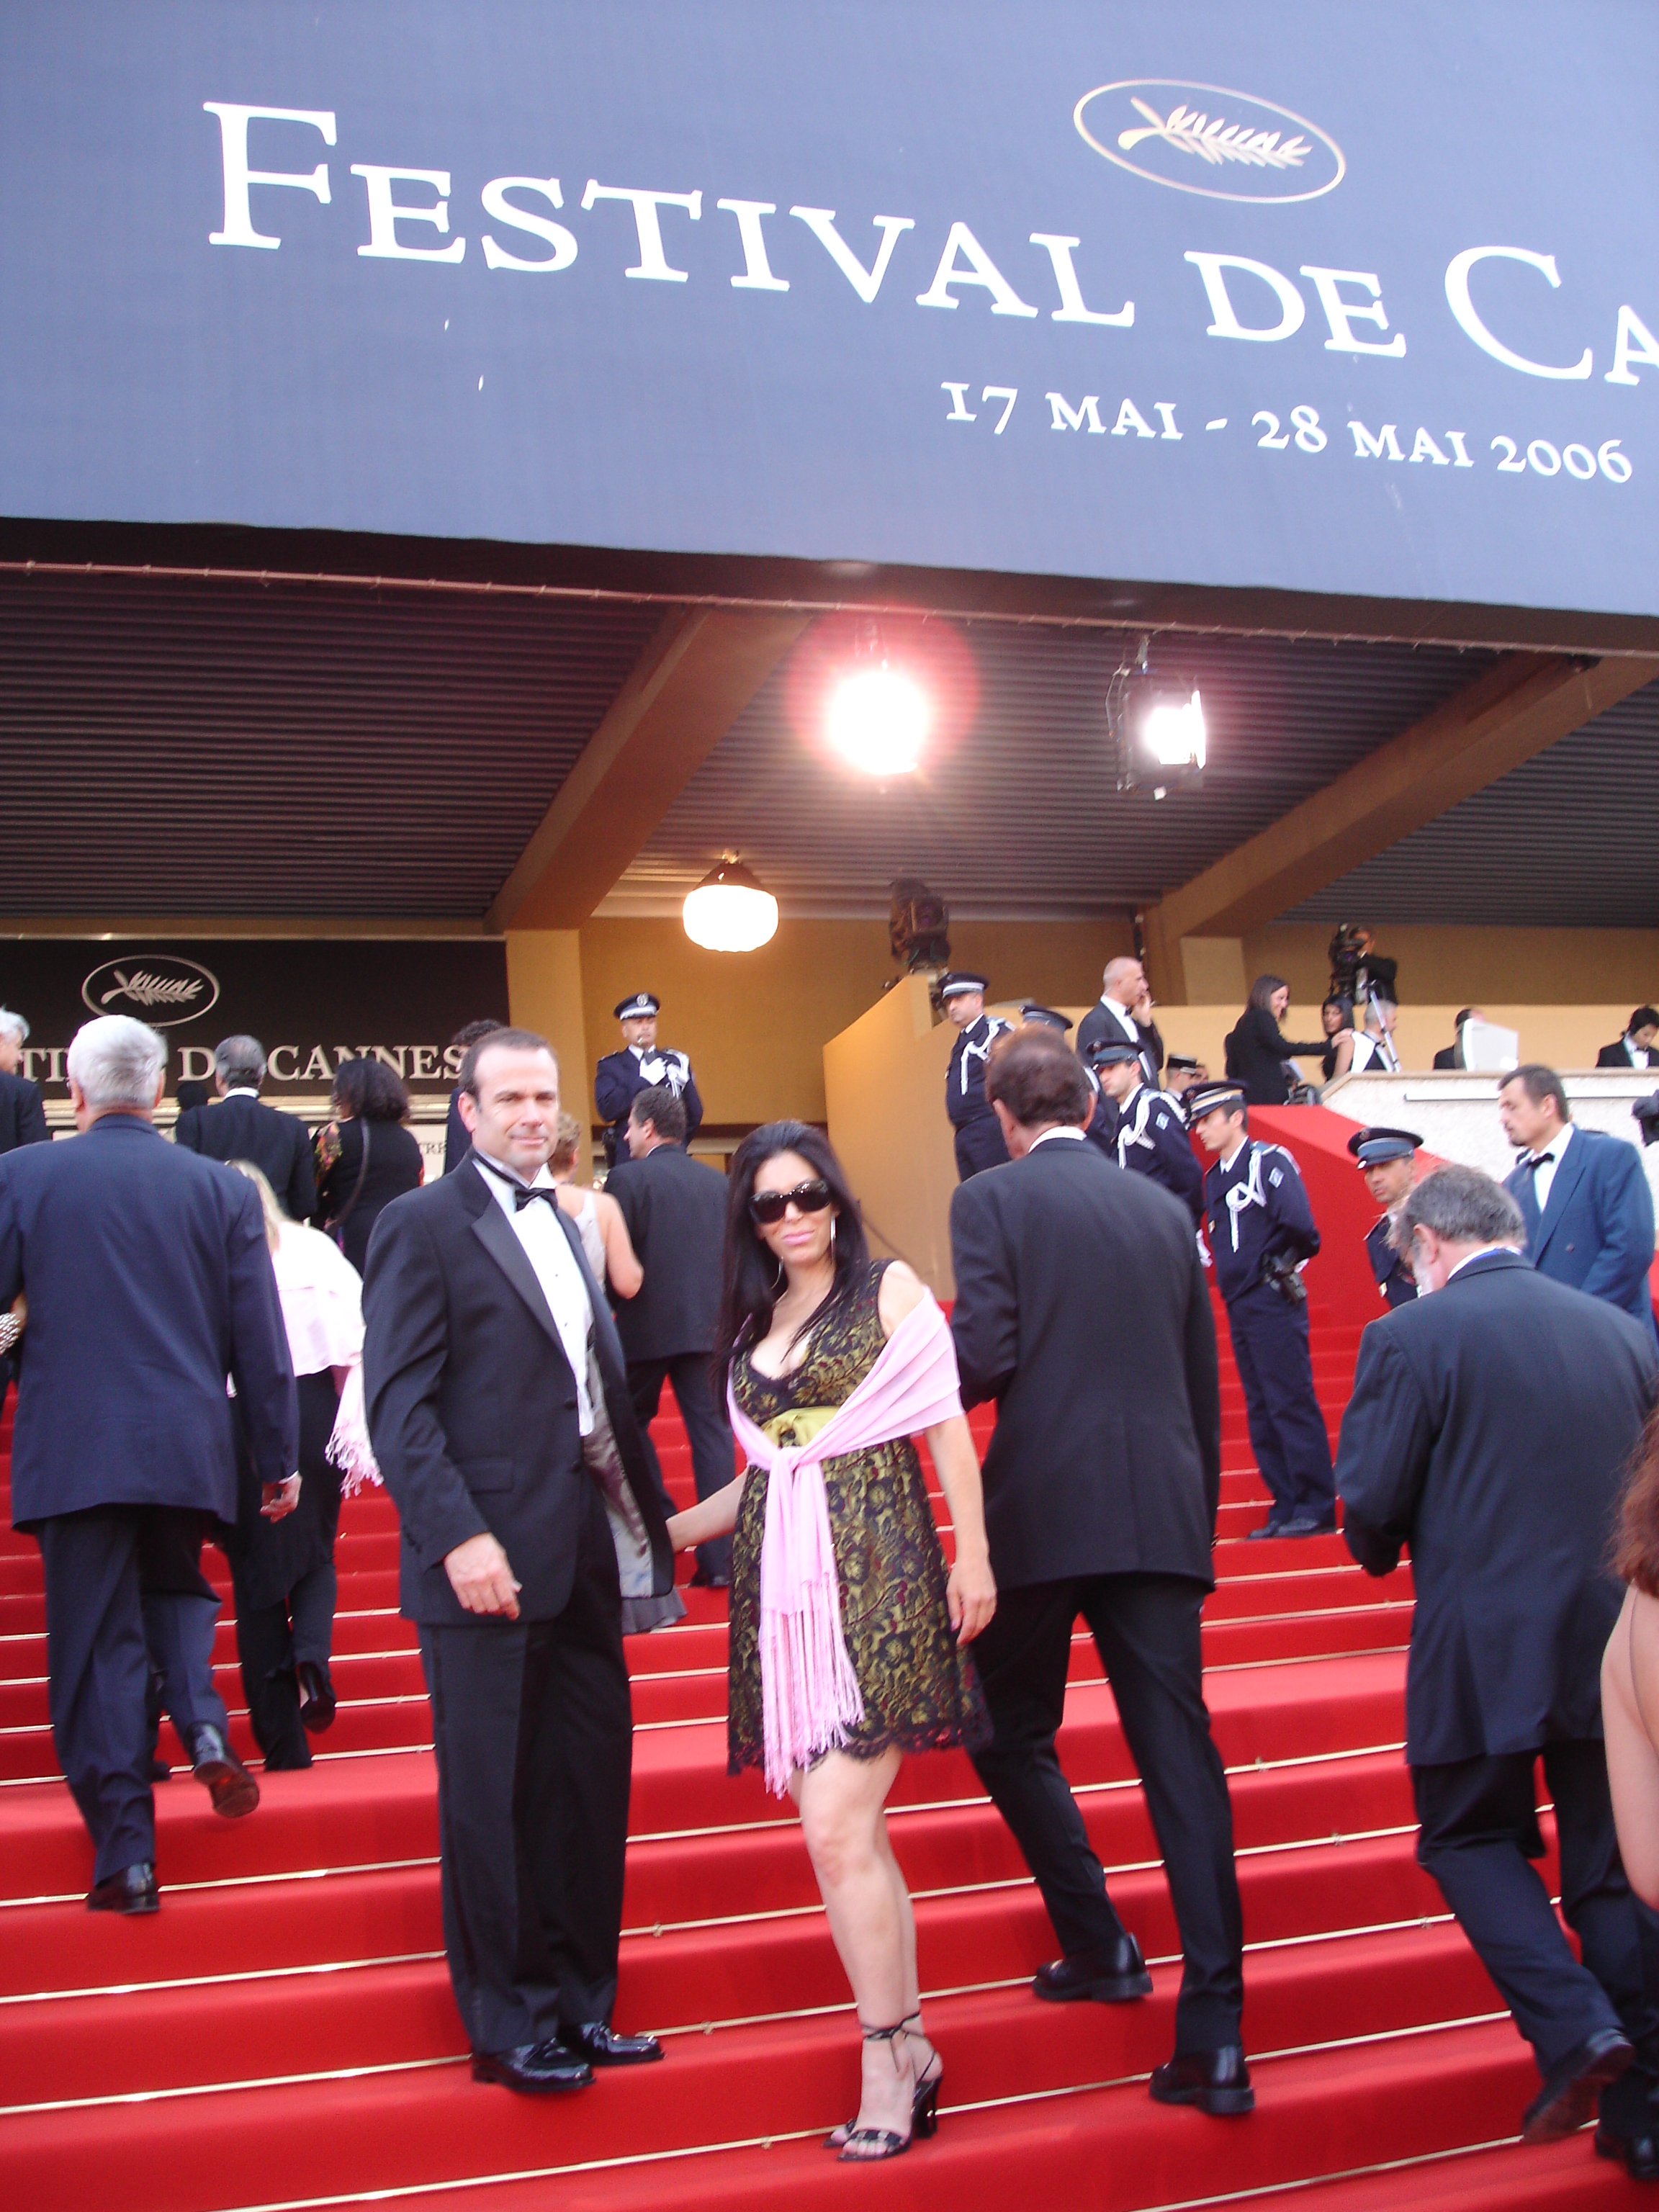 Bill Doyle and Lissa Negrin Cannes Film Festival